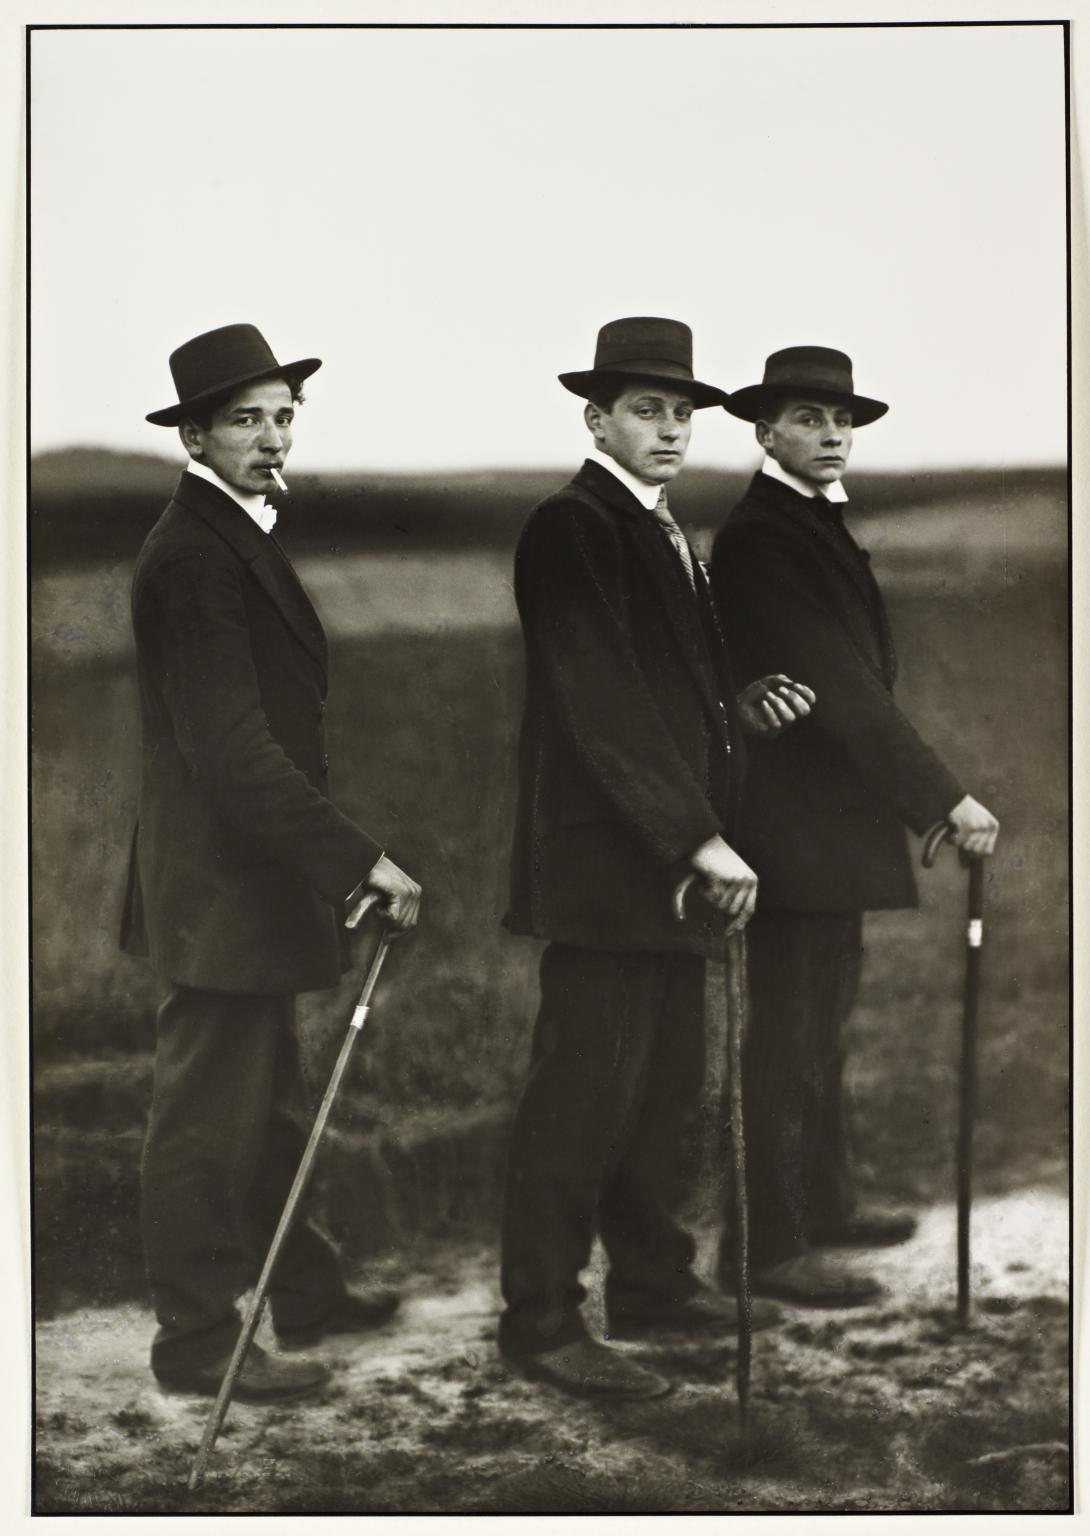 “Young Farmers” by August Sander